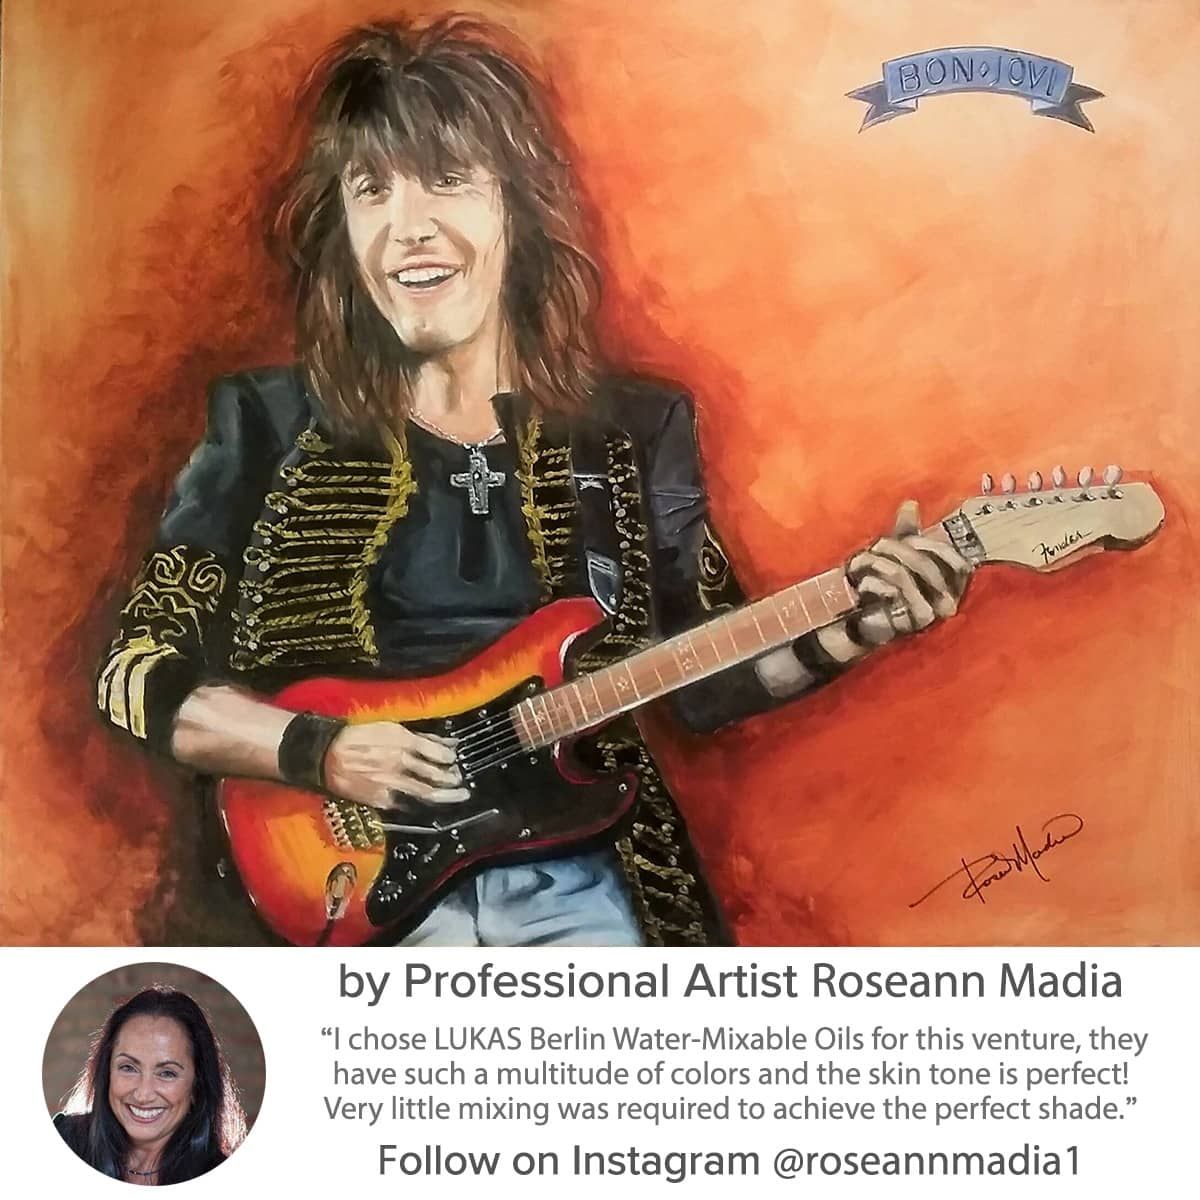 Roseann says "I’ve done over 100 Bon Jovi paintings, but this was ‘The King’ of the crop!"